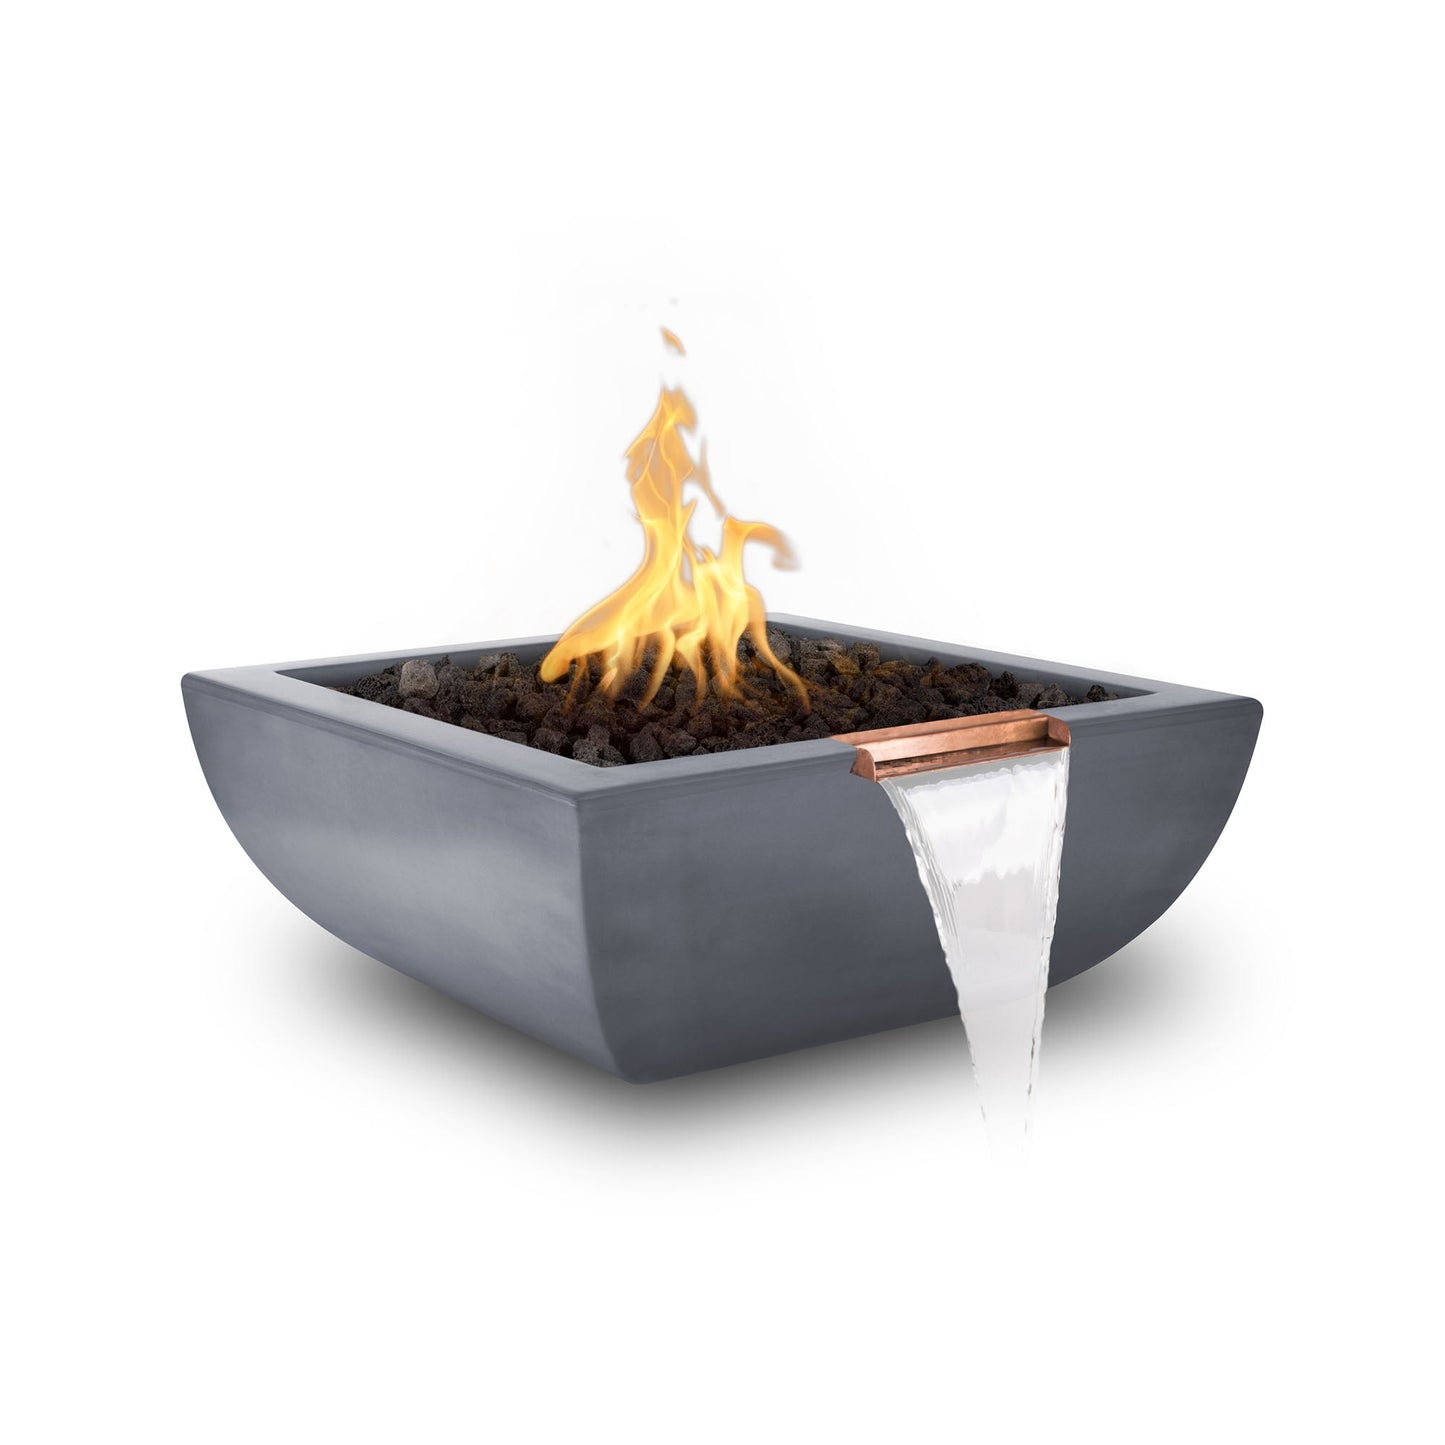 The Outdoor Plus Square Avalon 24" Brown GFRC Concrete Liquid Propane Fire & Water Bowl with Match Lit with Flame Sense Ignition